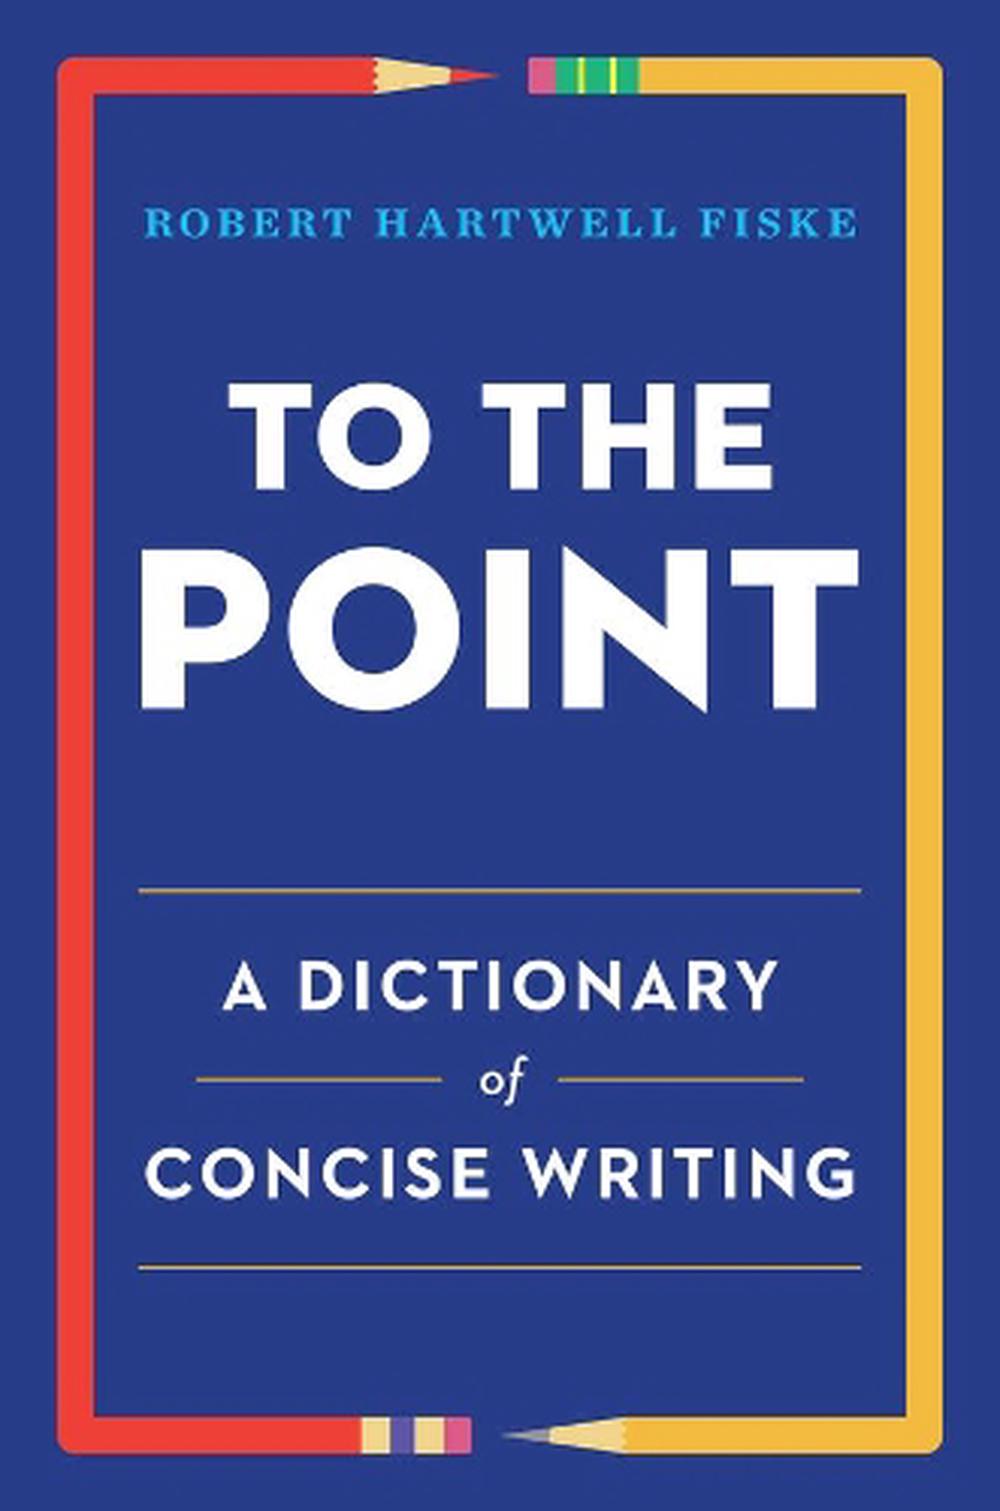 To the Point A Dictionary of Concise Writing by Robert Hartwell Fiske